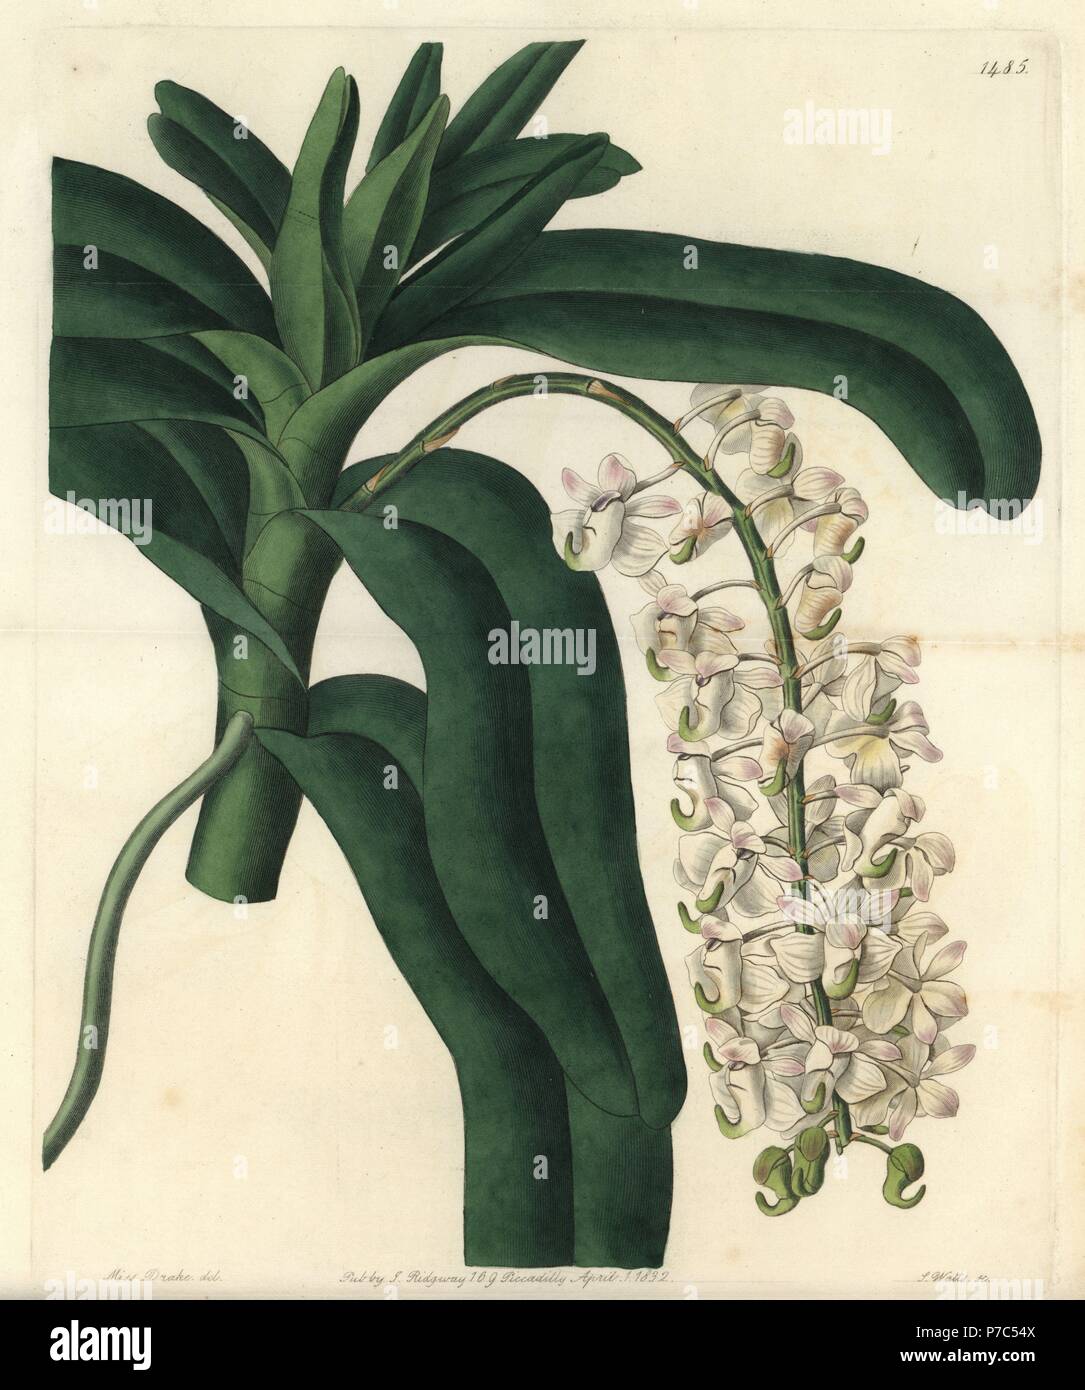 Fox brush orchid or horn-flowered airplant, Aerides cornutum. Handcoloured copperplate engraving by S. Watts after an illustration by Sarah Drake from Sydenham Edwards' Botanical Register, Ridgeway, London, 1832. Stock Photo